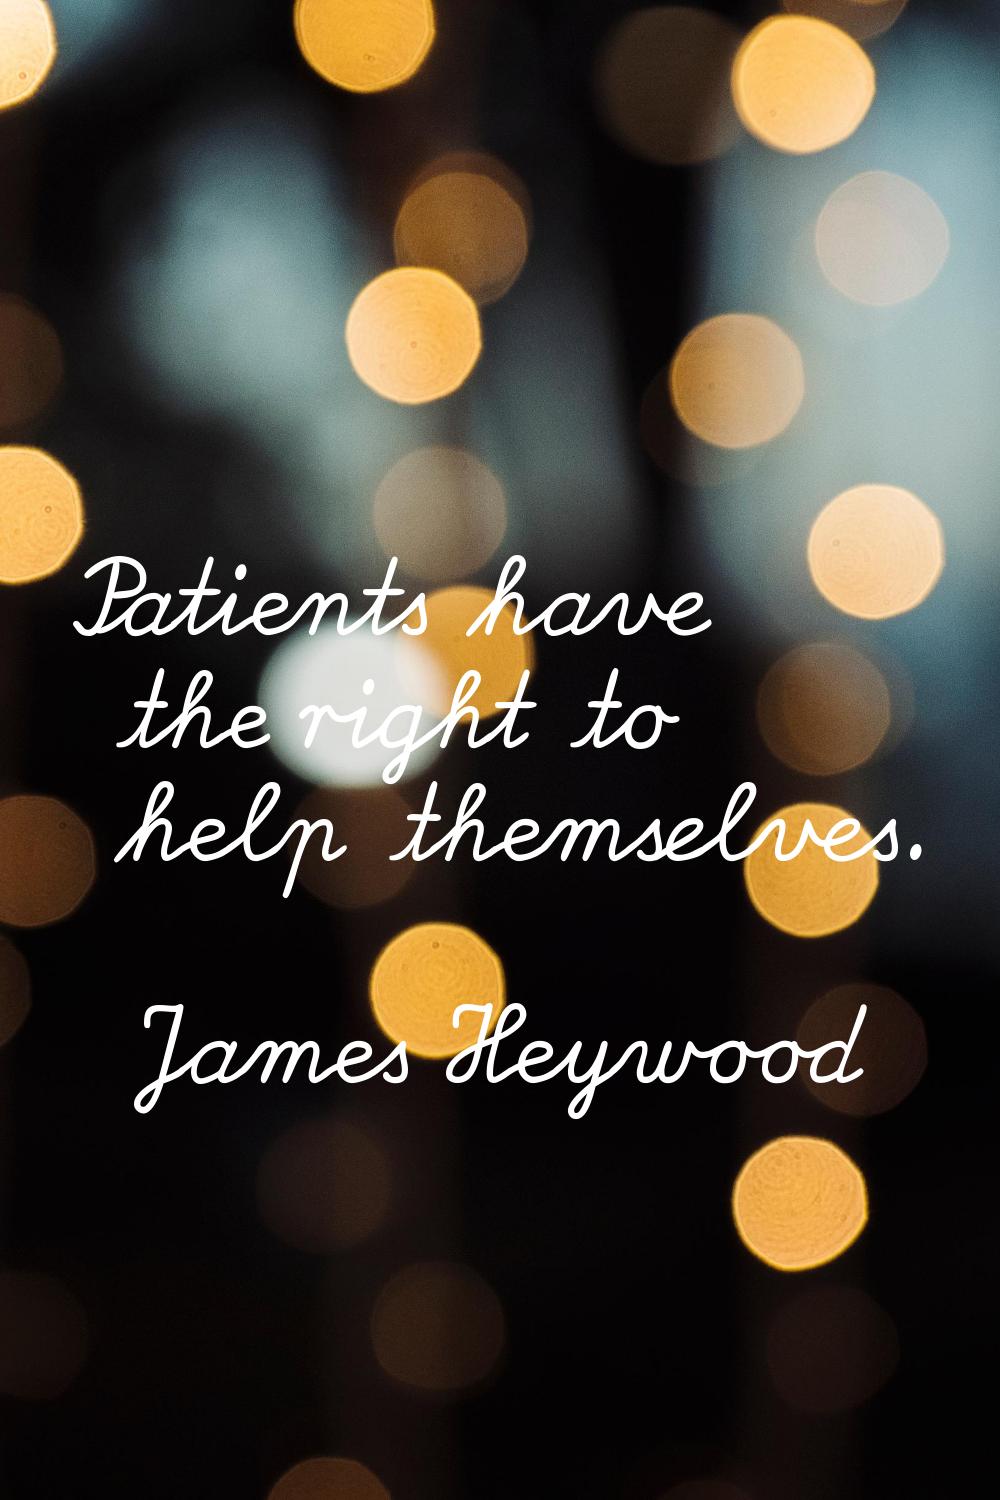 Patients have the right to help themselves.